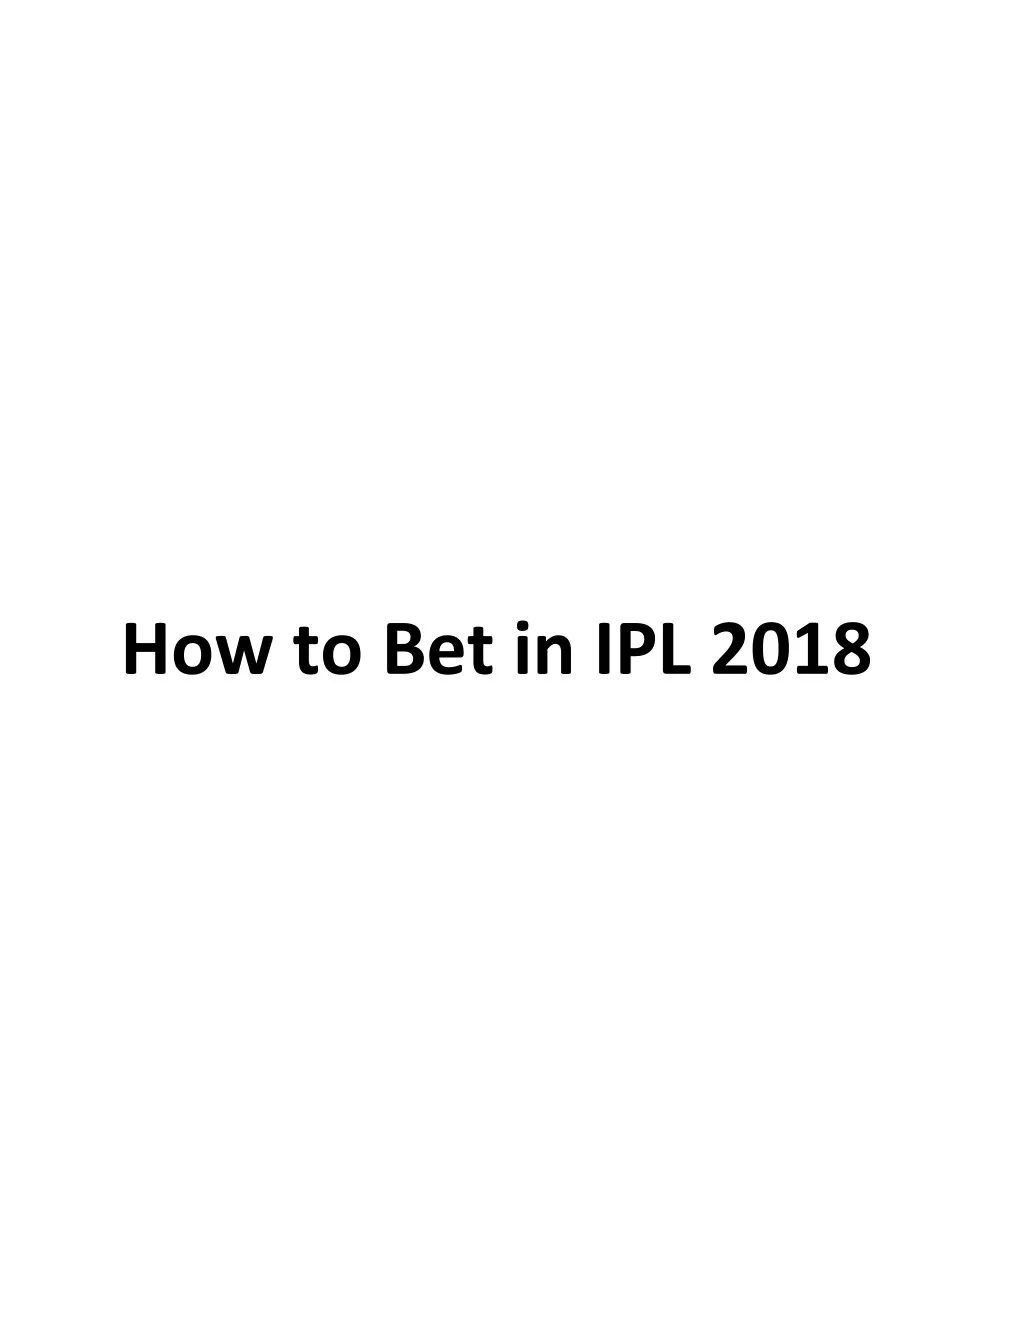 how to bet in ipl 2018